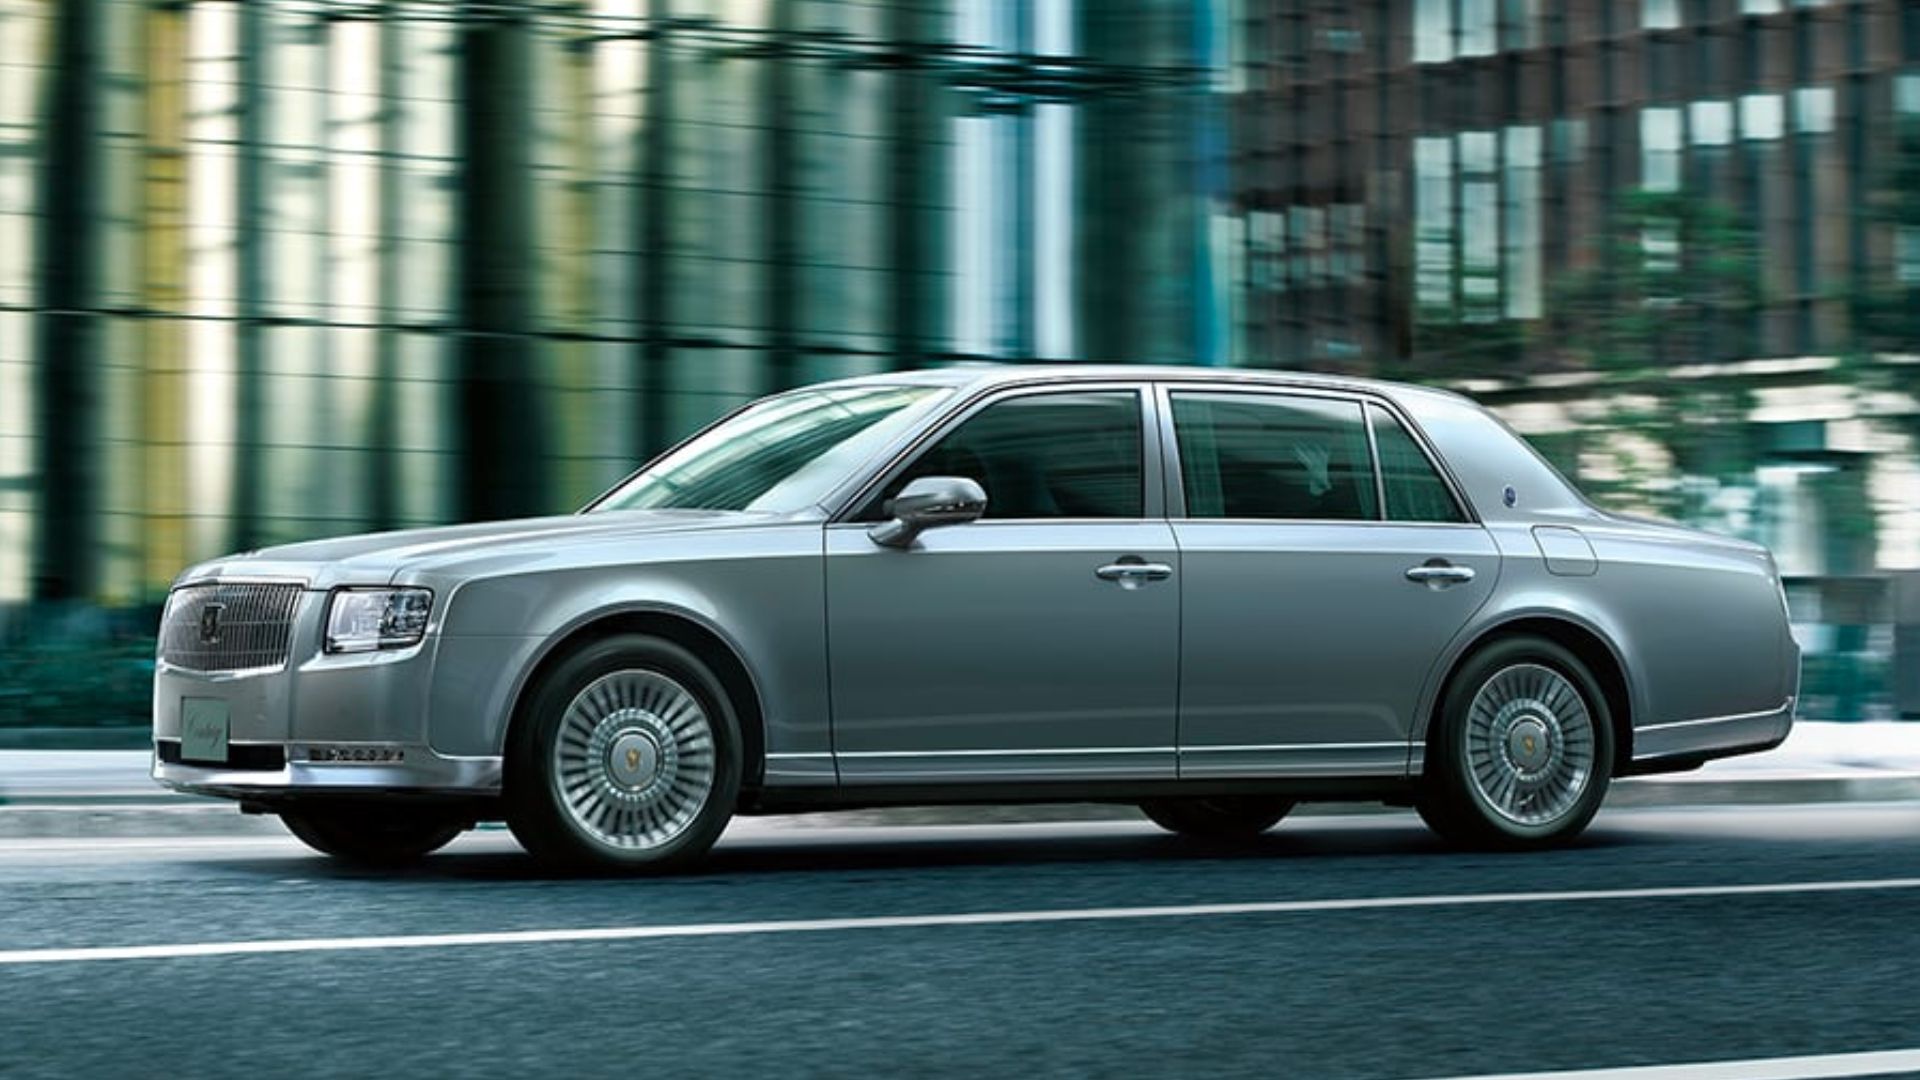 The Toyota Century SUV is coming soon